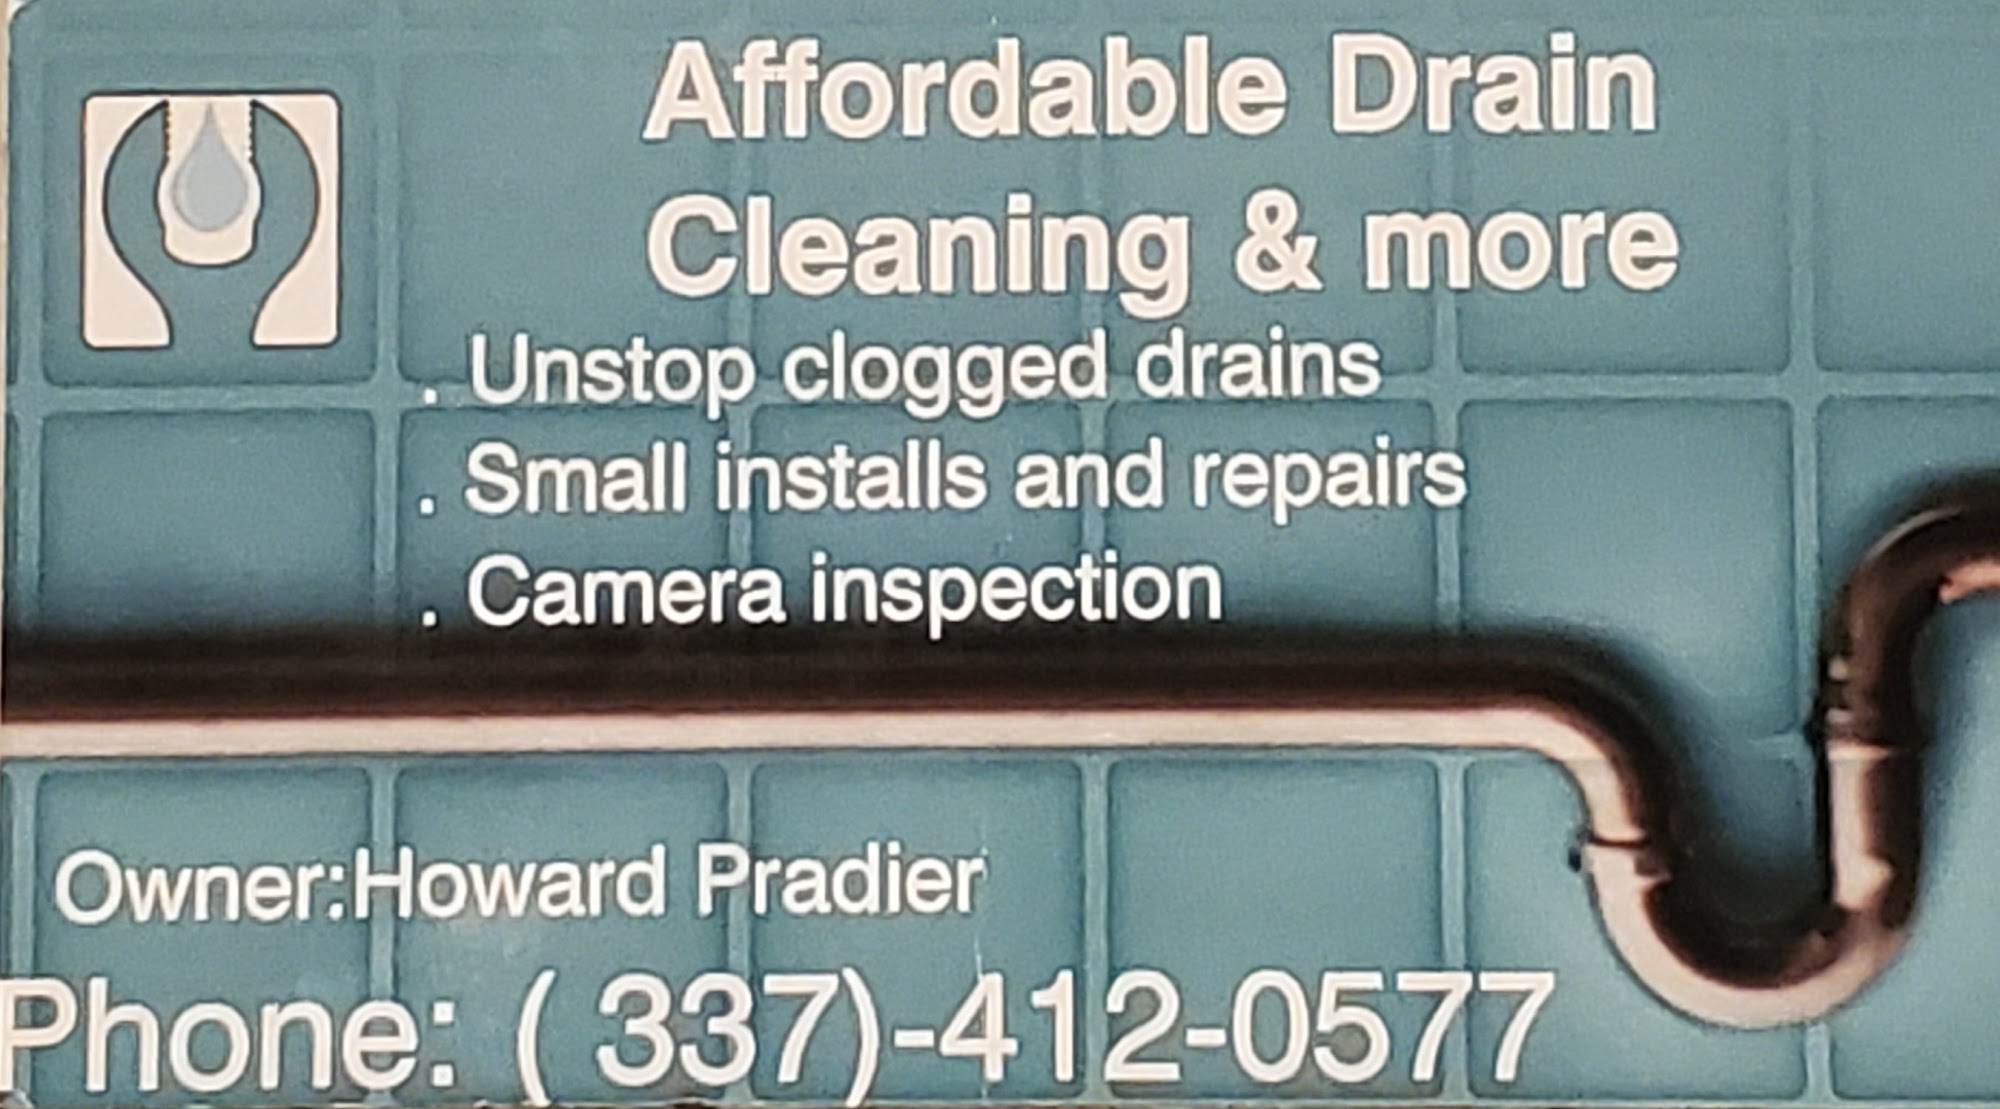 Affordable Drain Cleaning & More